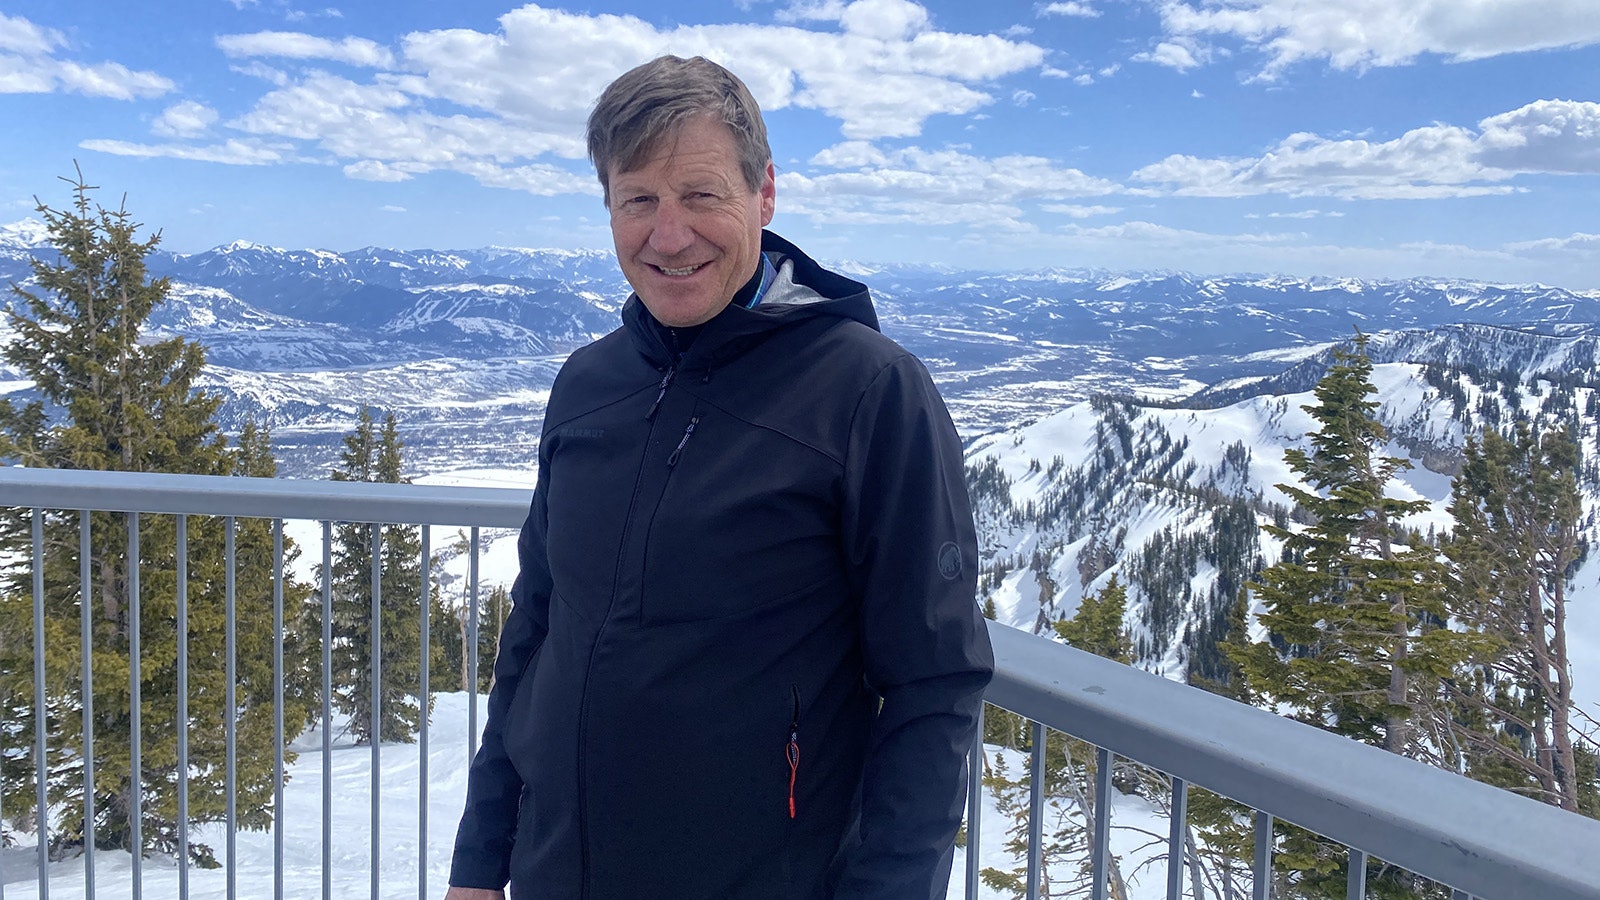 After 32 years as one of the anchor architects behind the growth of Jackson Hole Mountain Resort, CFO Matt McCreedy is retiring June 30.